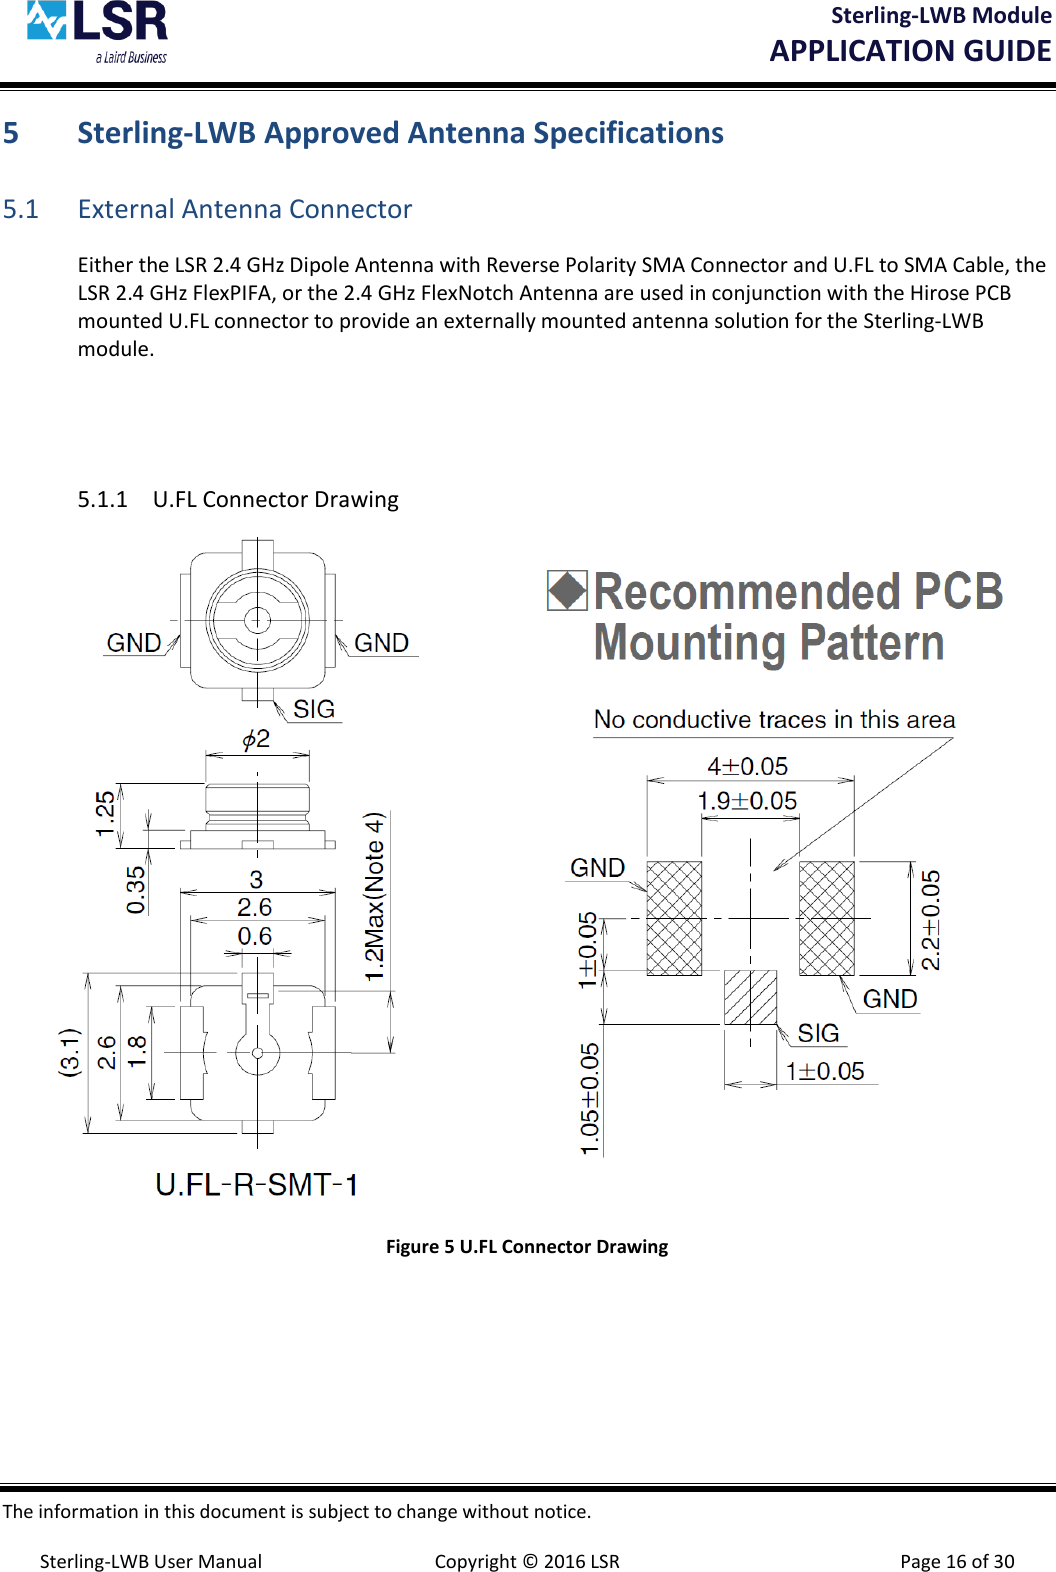 Sterling-LWB Module       APPLICATION GUIDE  The information in this document is subject to change without notice.  Sterling-LWB User Manual  Copyright © 2016 LSR  Page 16 of 30 5 Sterling-LWB Approved Antenna Specifications 5.1 External Antenna Connector Either the LSR 2.4 GHz Dipole Antenna with Reverse Polarity SMA Connector and U.FL to SMA Cable, the LSR 2.4 GHz FlexPIFA, or the 2.4 GHz FlexNotch Antenna are used in conjunction with the Hirose PCB mounted U.FL connector to provide an externally mounted antenna solution for the Sterling-LWB module.   5.1.1 U.FL Connector Drawing  Figure 5 U.FL Connector Drawing    